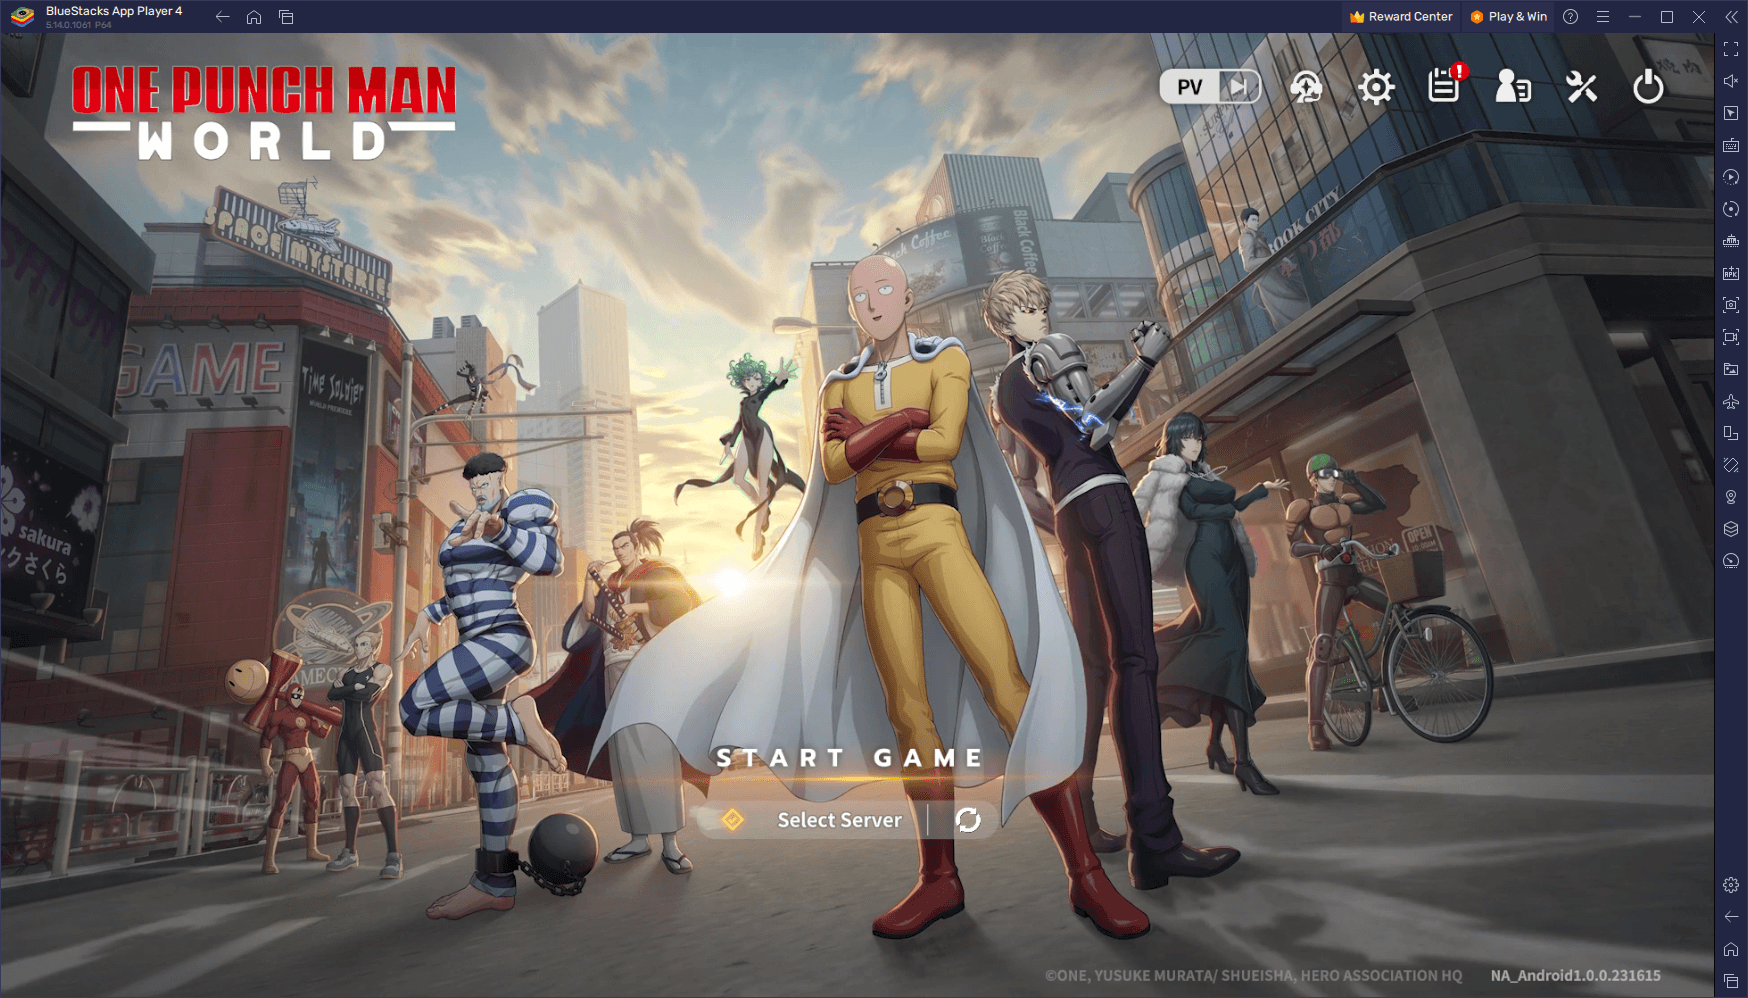 How to Play One Punch Man World at a Smooth 60 FPS on PC With BlueStacks